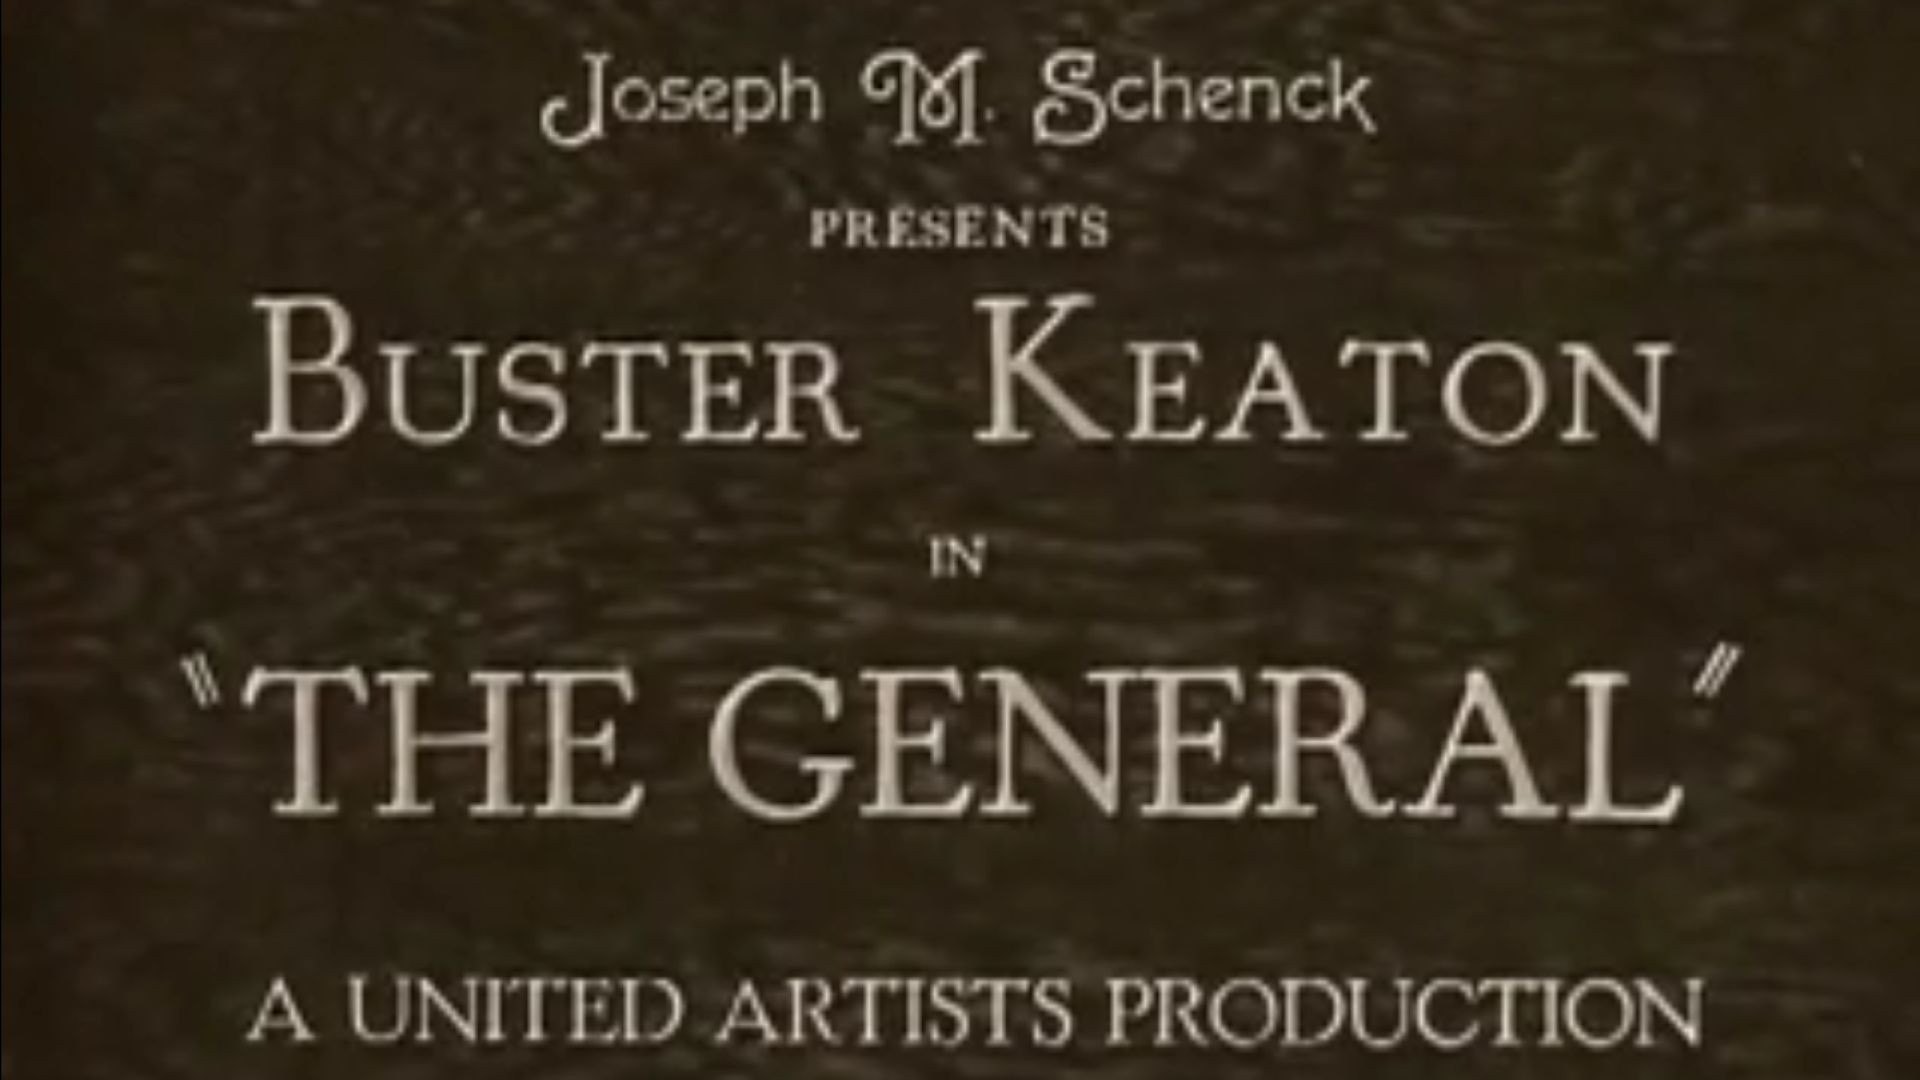 The General - Silent Film (1926)